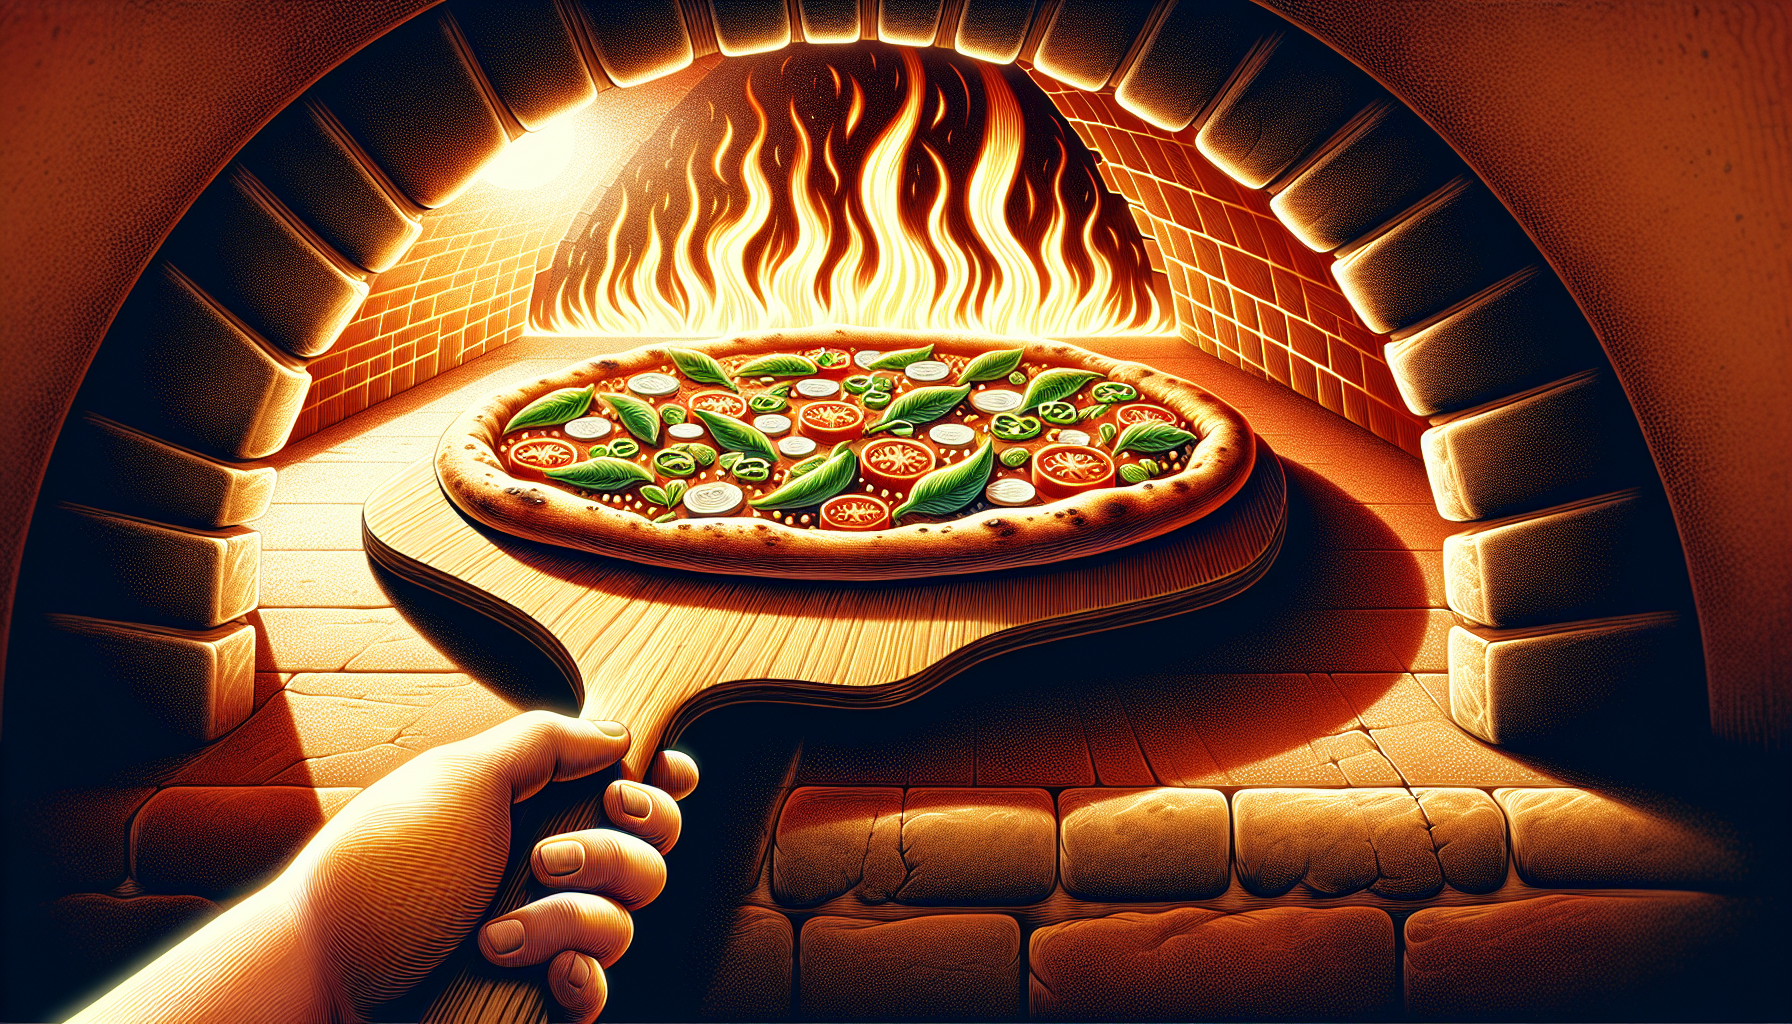 Illustration of a pizza peel in use